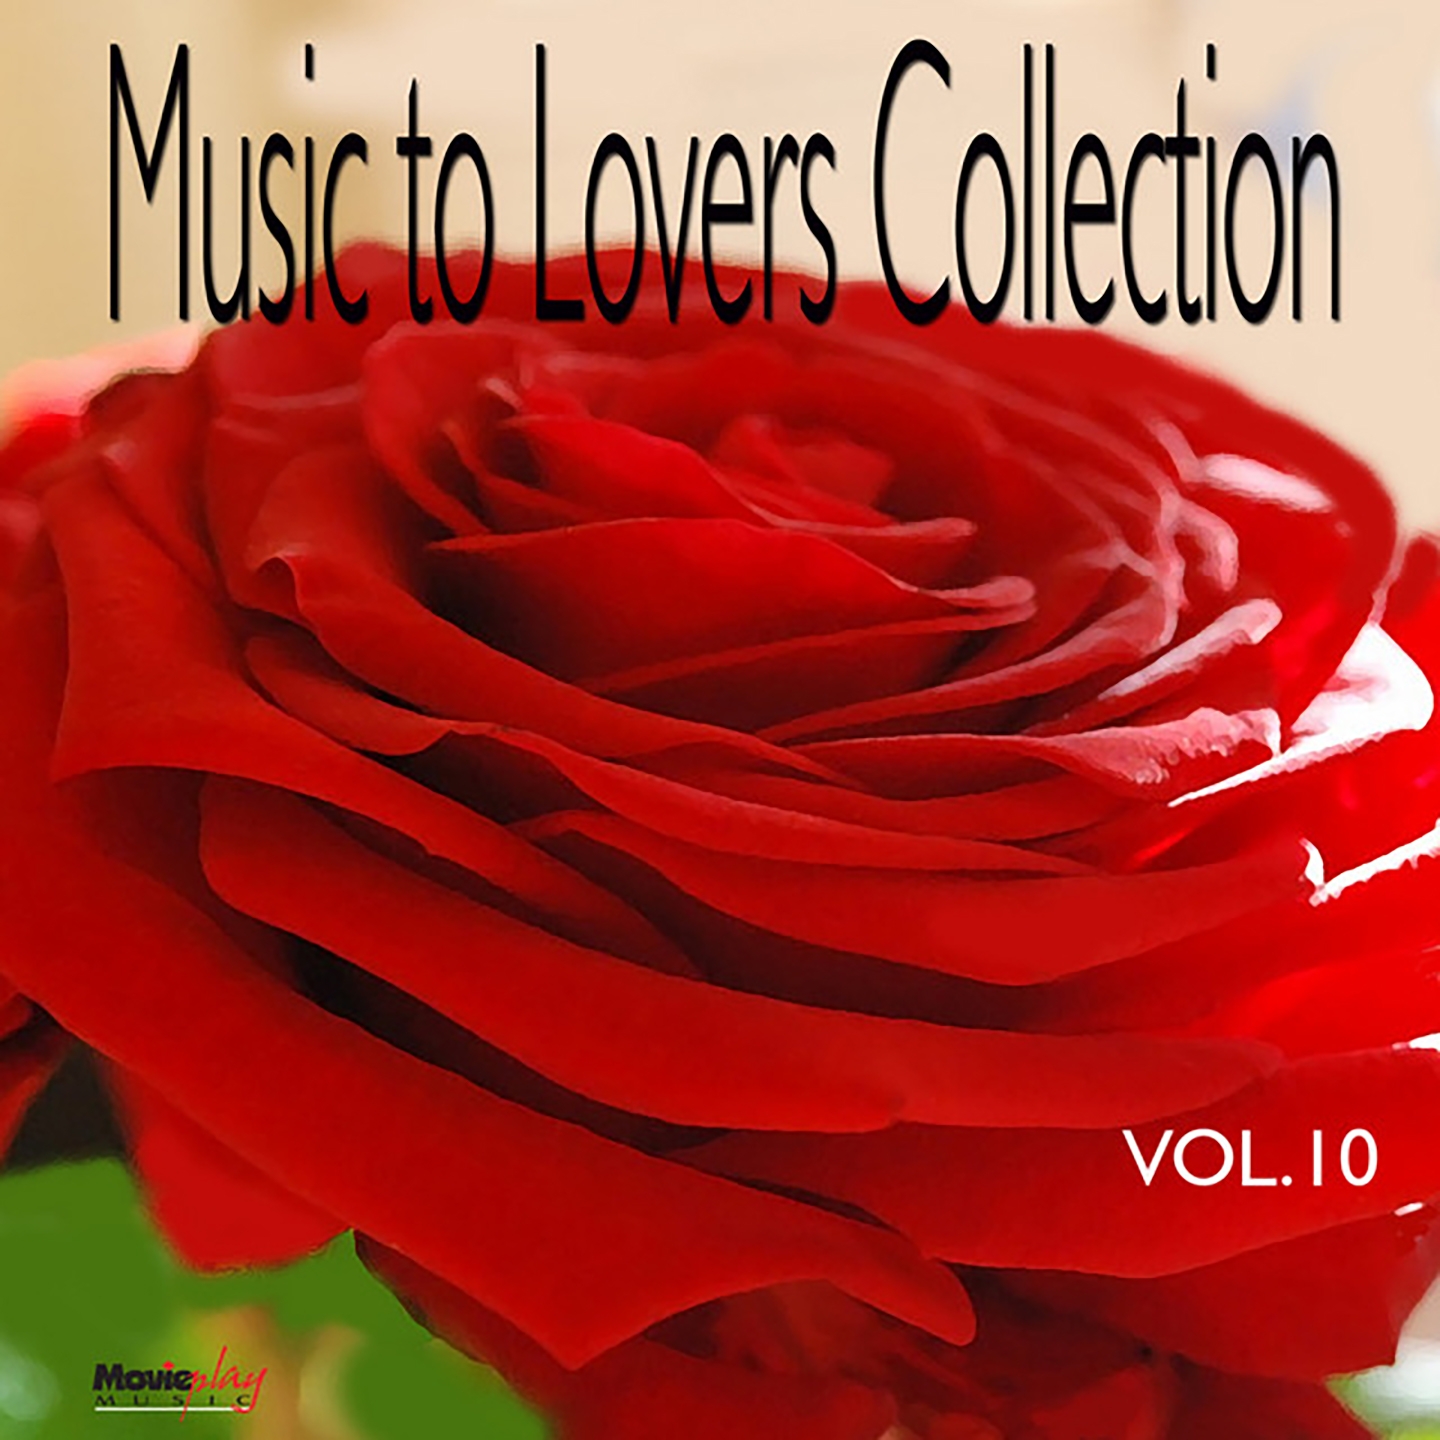 Music to Lovers Collection, Vol. 10